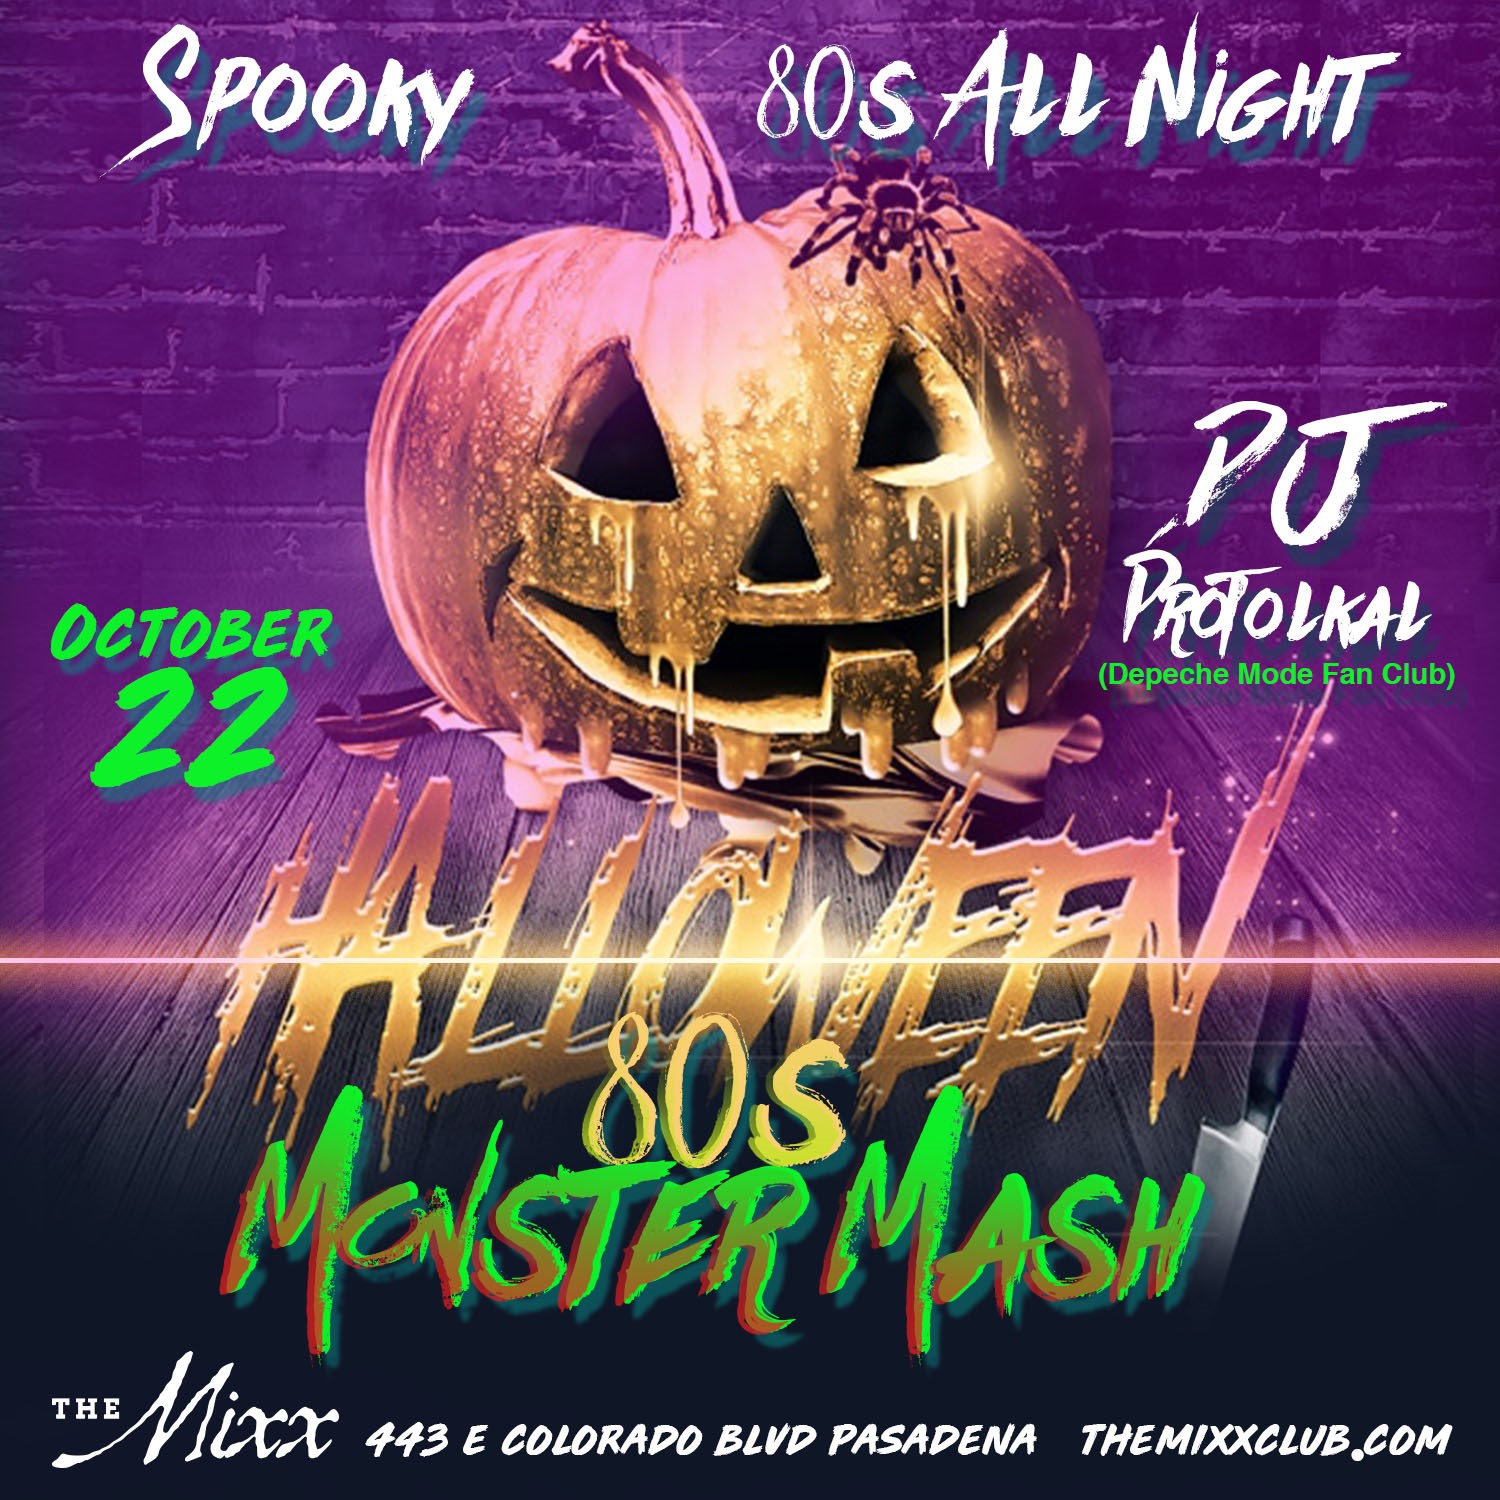 You are currently viewing 80s Halloween Monster Mash Dance Party and Video Show